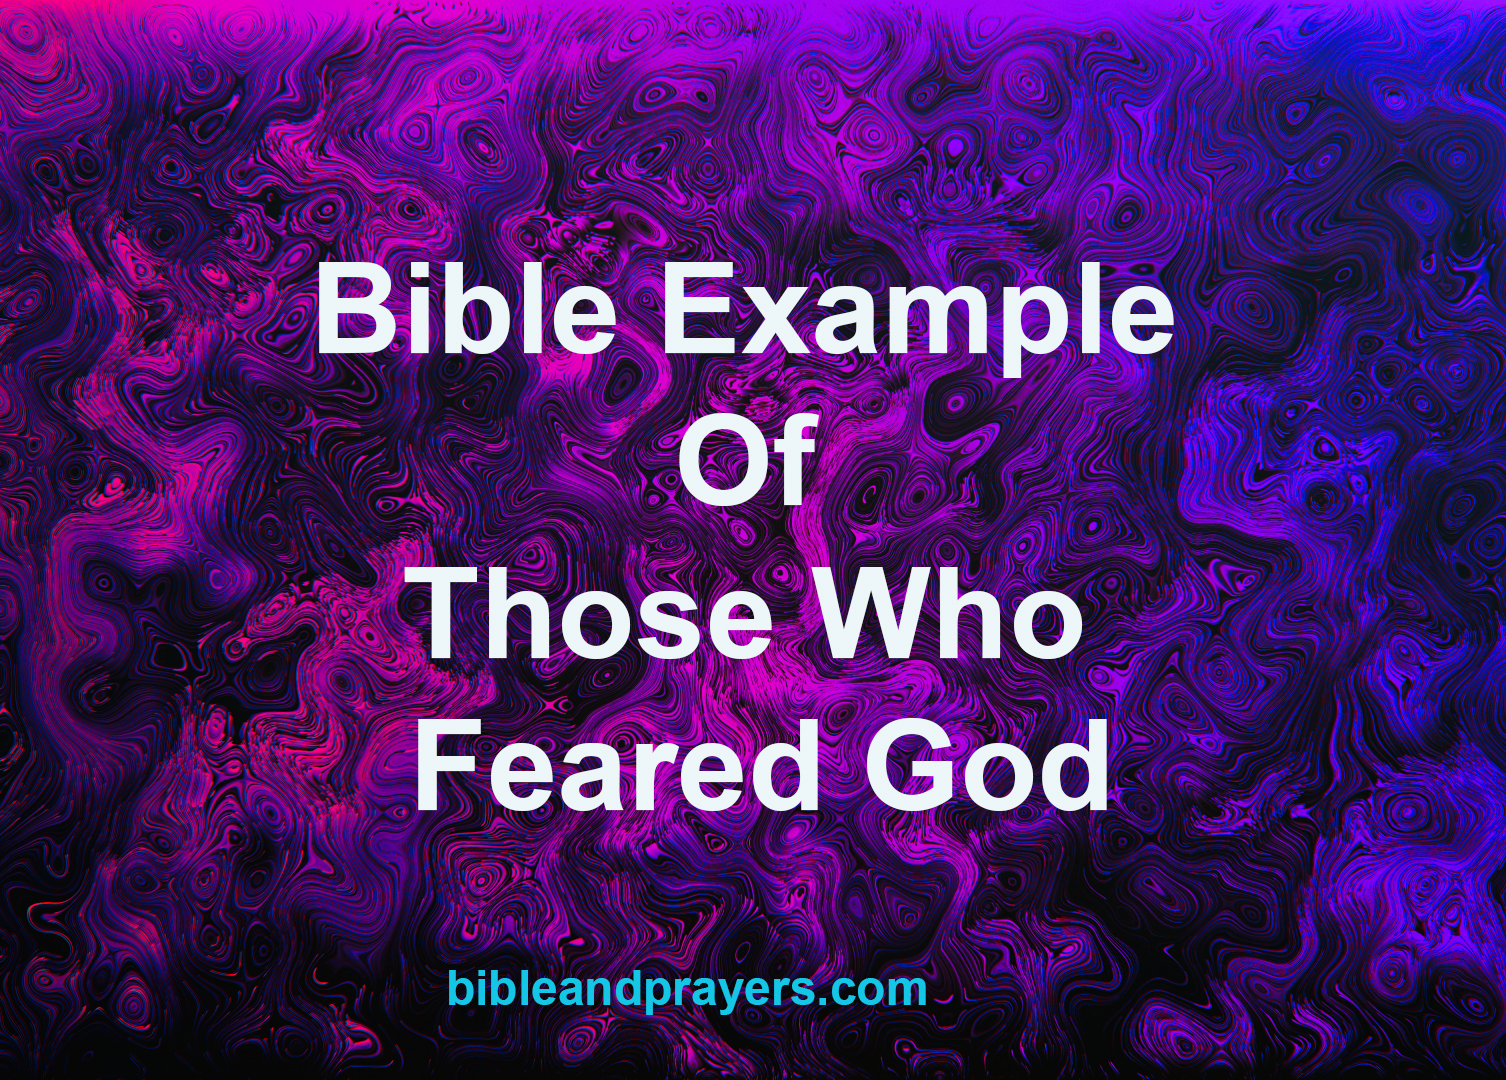 Bible Example Of Those Who Feared God